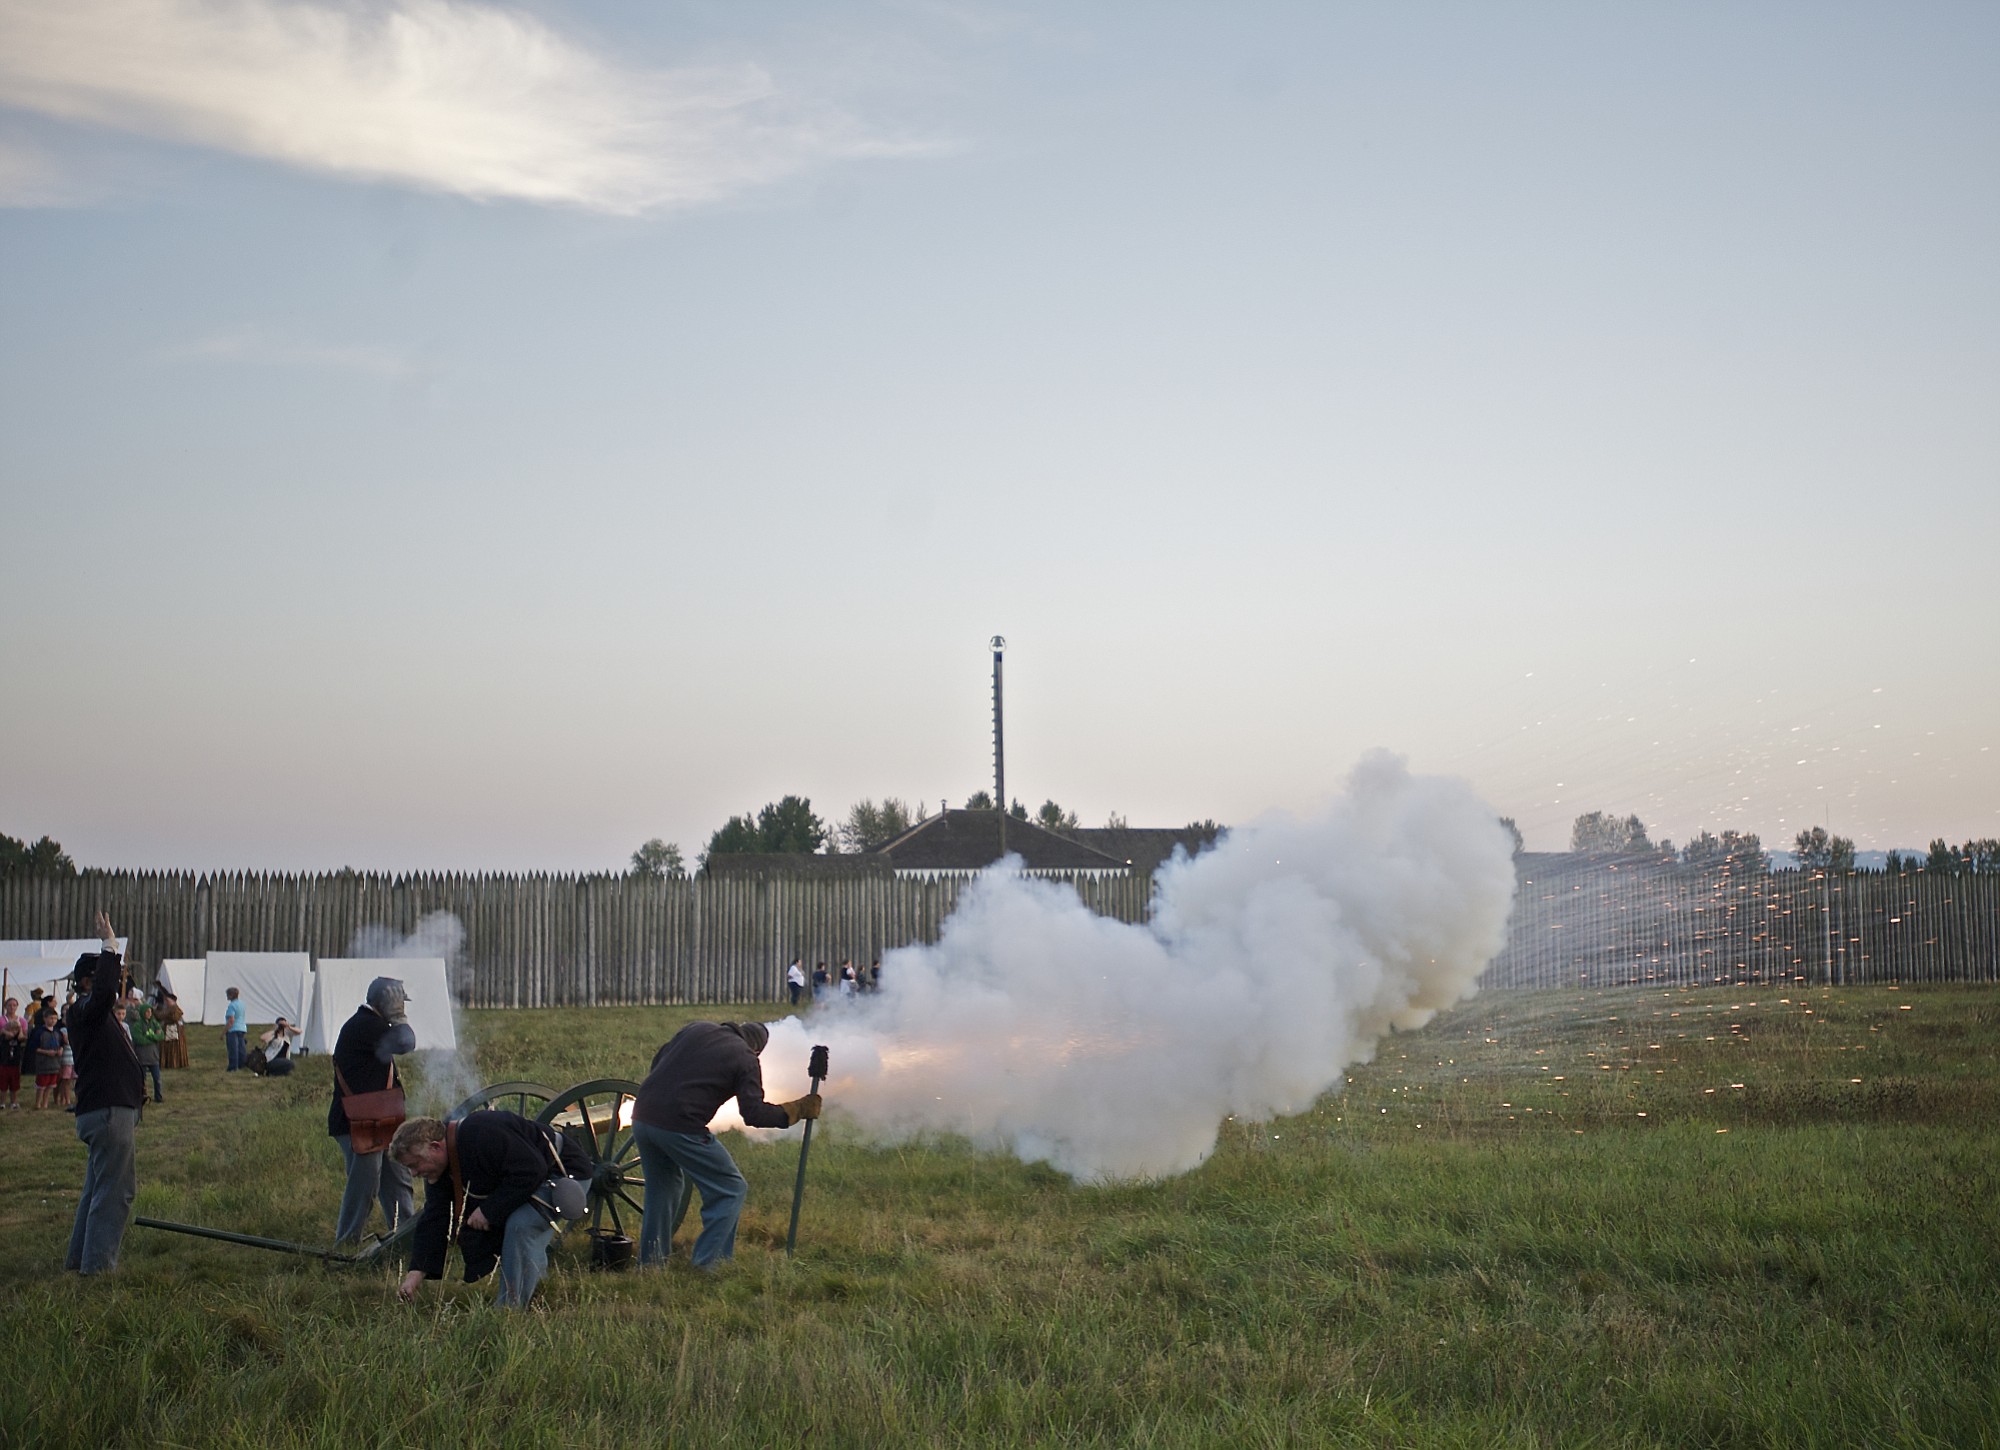 Re-enactors playing soldiers of the First Oregon Volunteers fire an artillery salute in 2013 at Fort Vancouver National Historic Site.